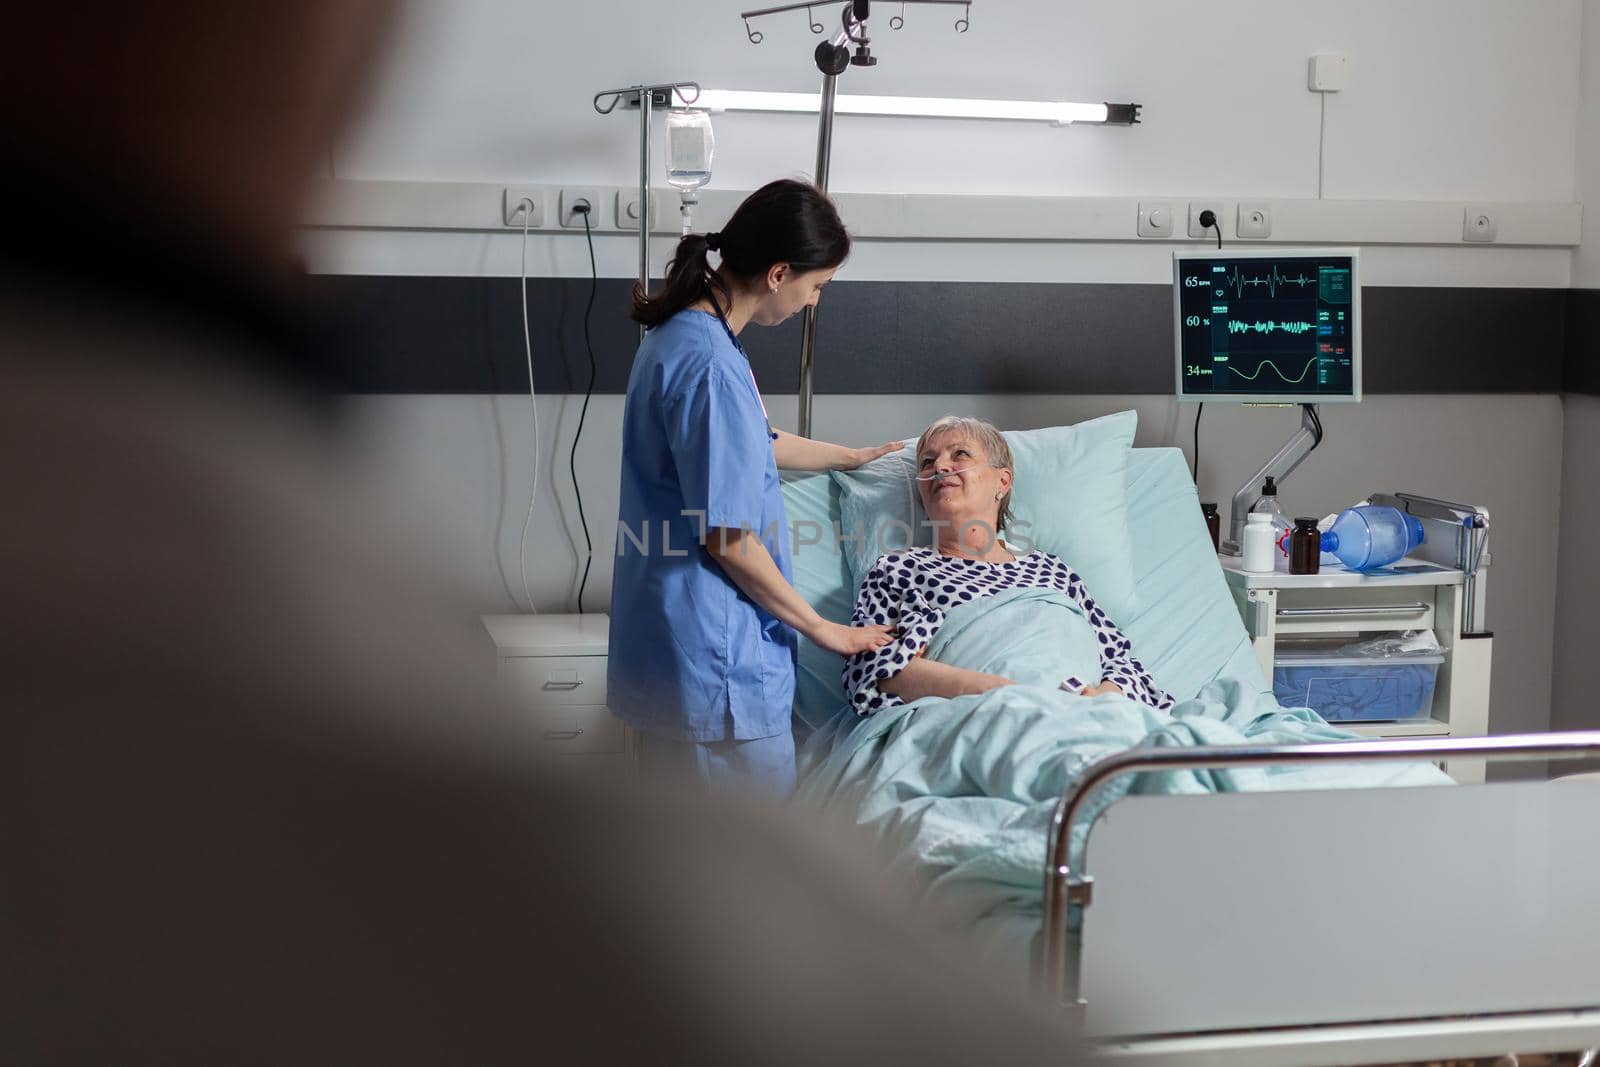 Fiendly doctor hands holding patient hand, in hospital room giving encouragement, empathy, support during medical examination. Patient breathing through oxygen mask.